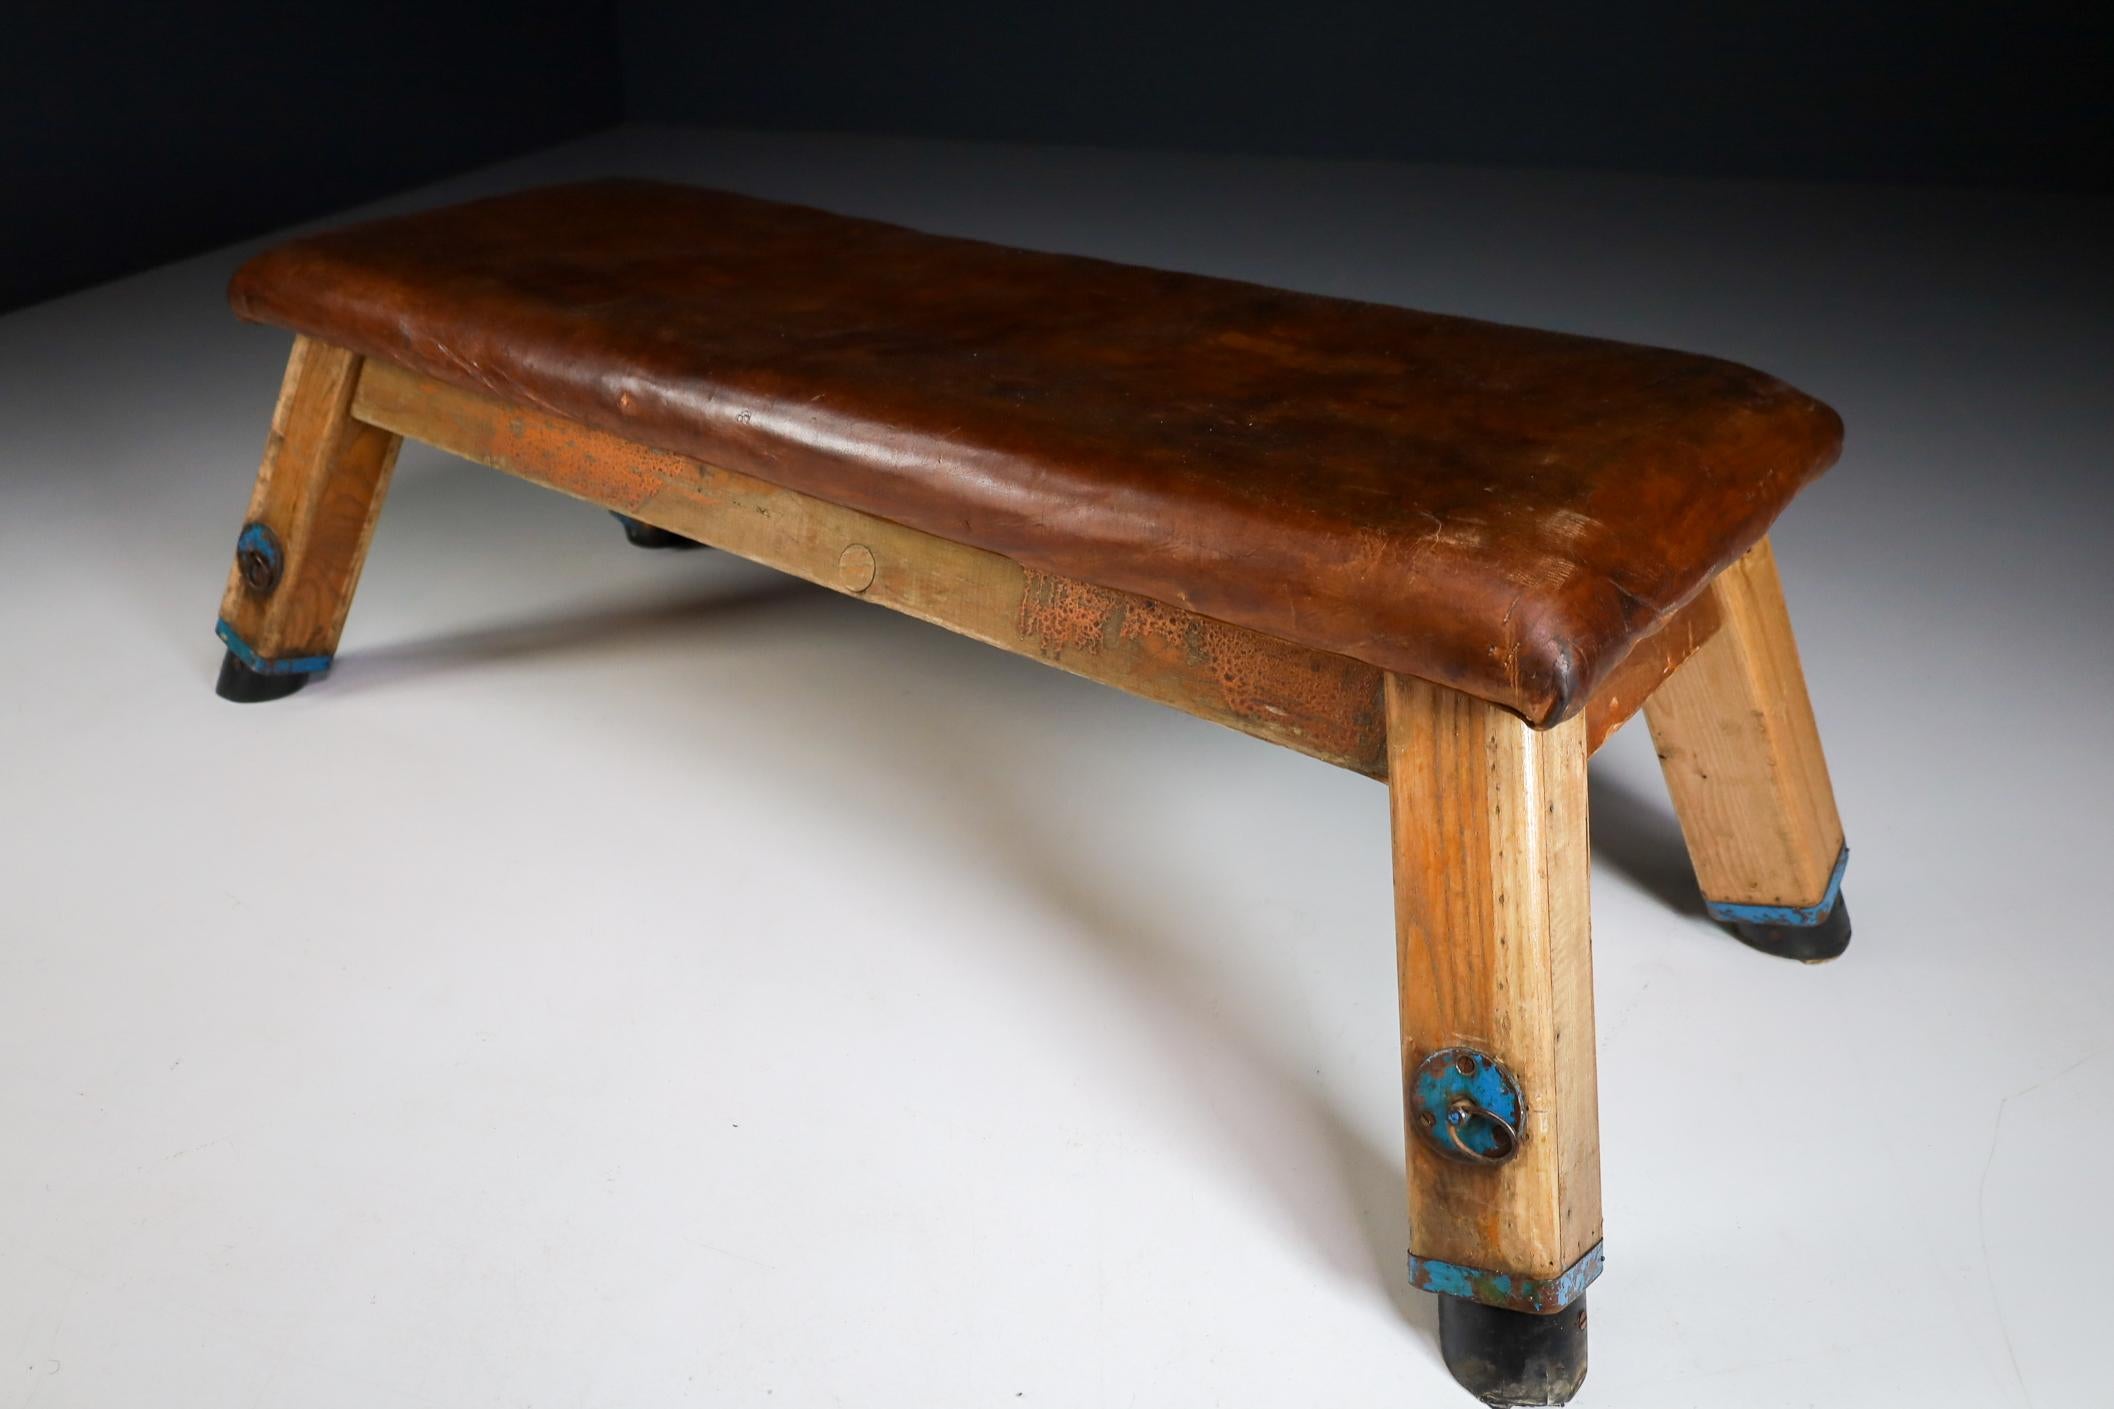 20th Century Patinated Saddle Leather Gym Bench or Table, circa 1950s